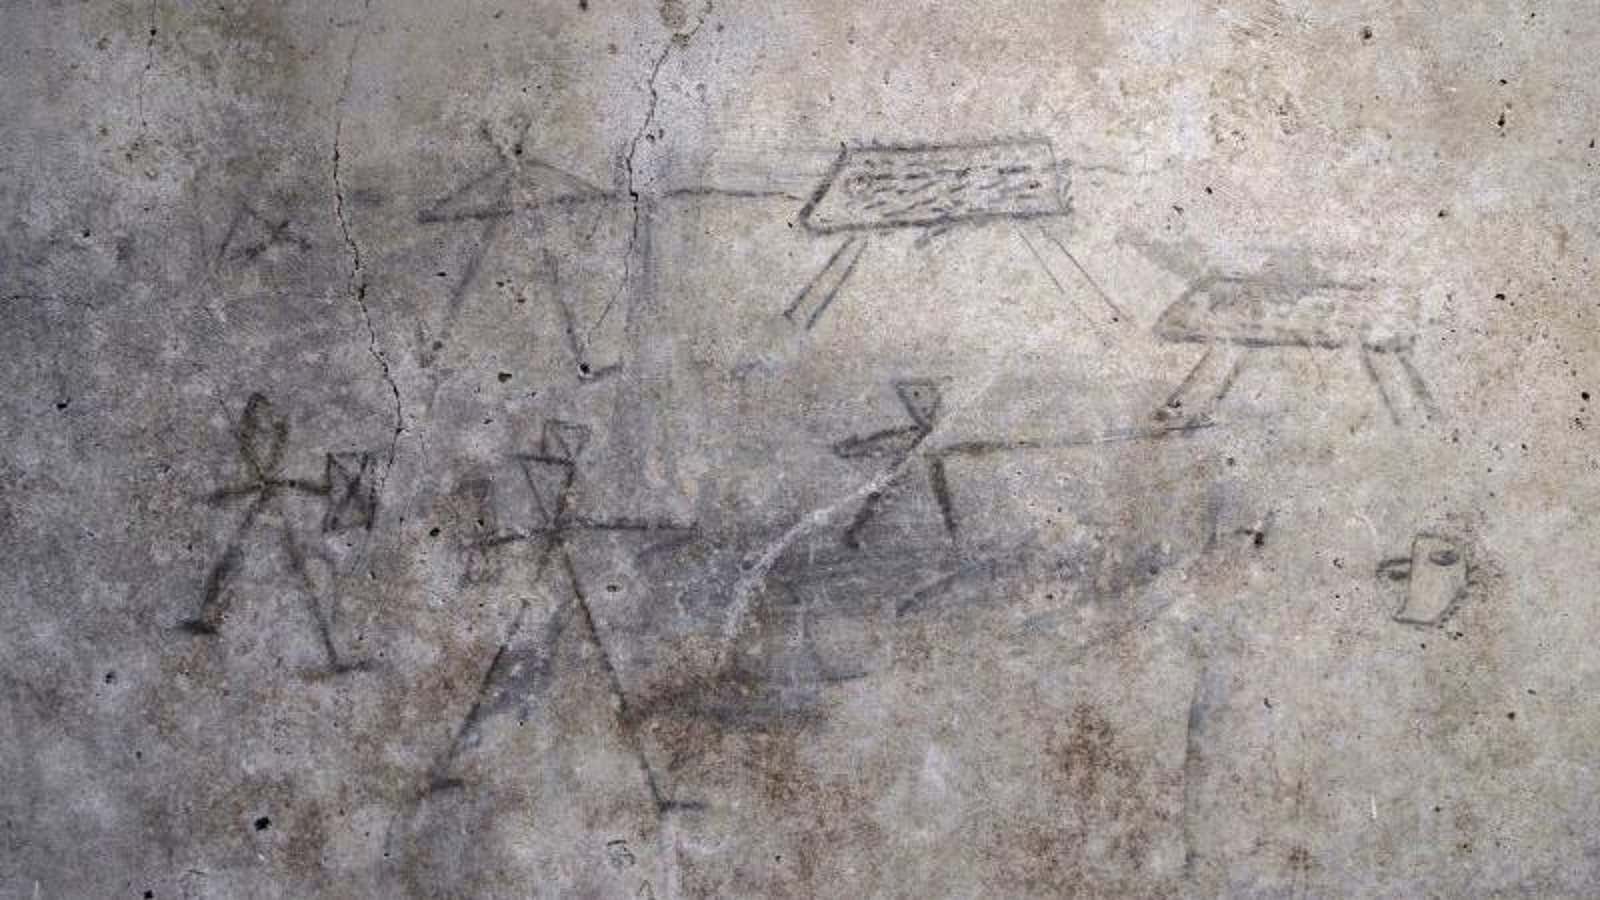 Image for Ancient Gladiator Sketches Likely Drawn by a Child Discovered in Pompeii